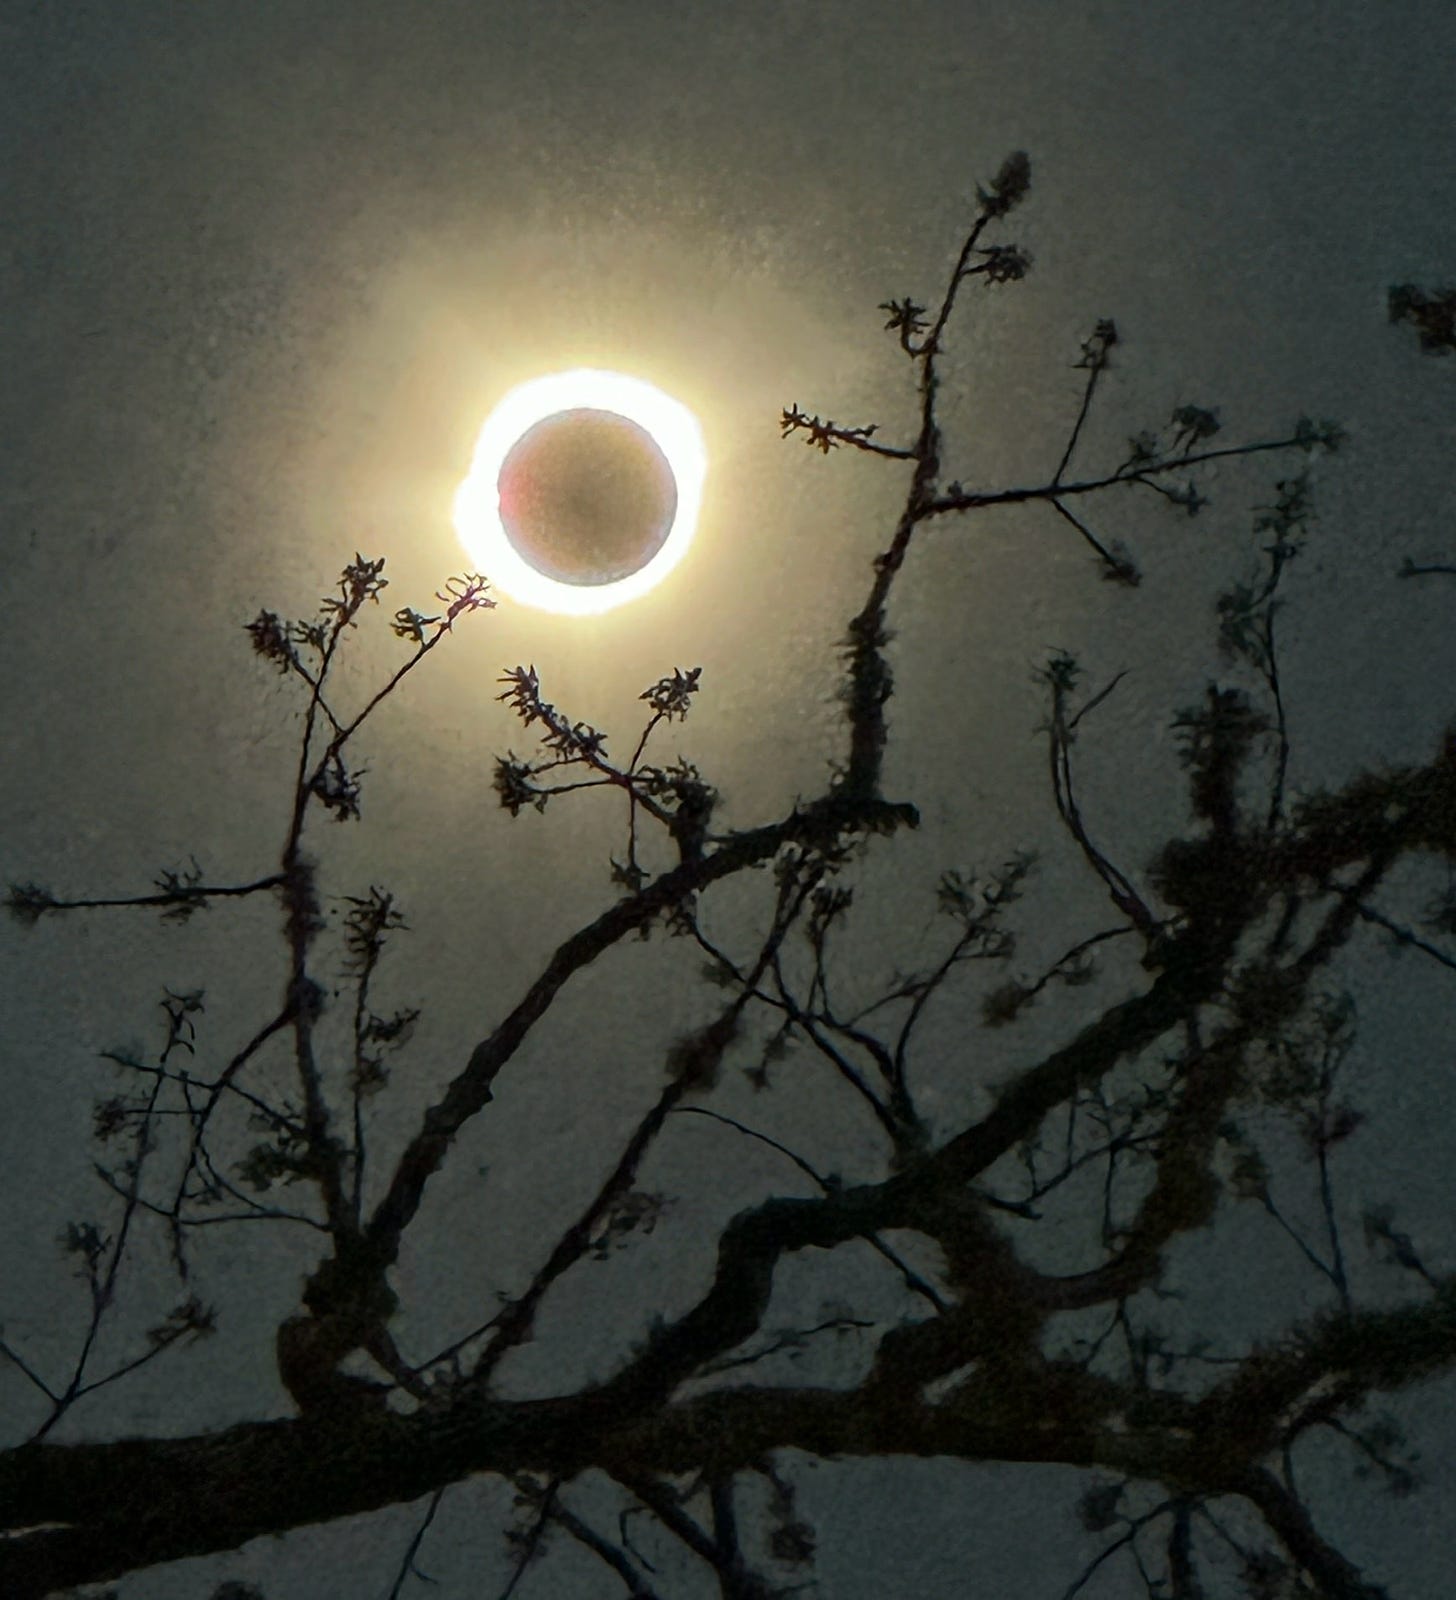 A total eclipse, with a thick ring of light, against a dark sky, behind the blackened silhouette of a tree.